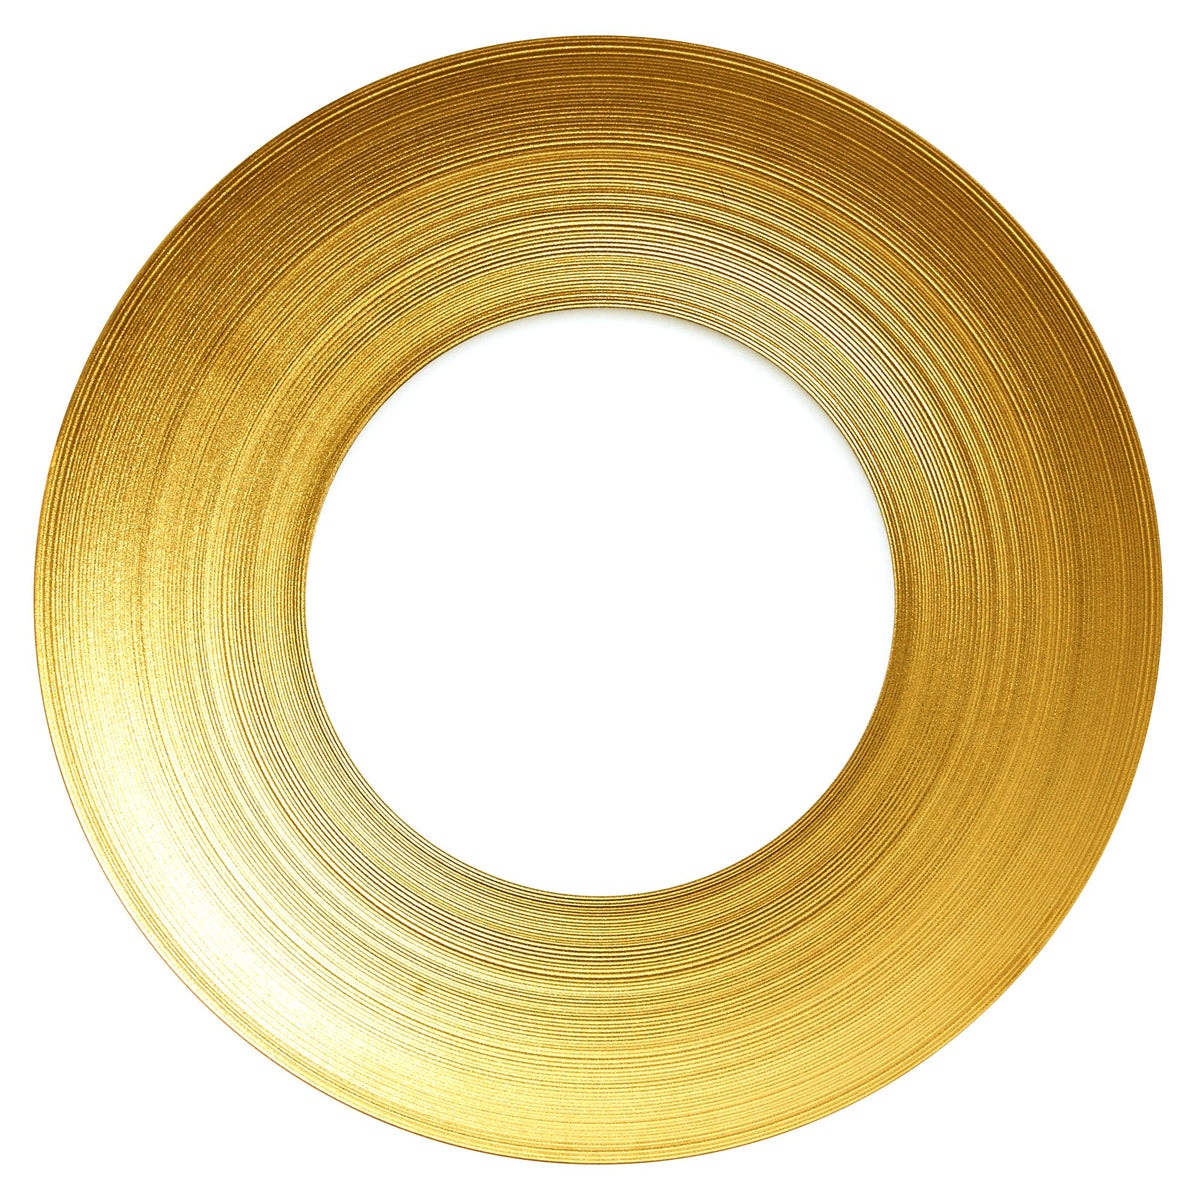 Hemisphere Charger Plate - Gold